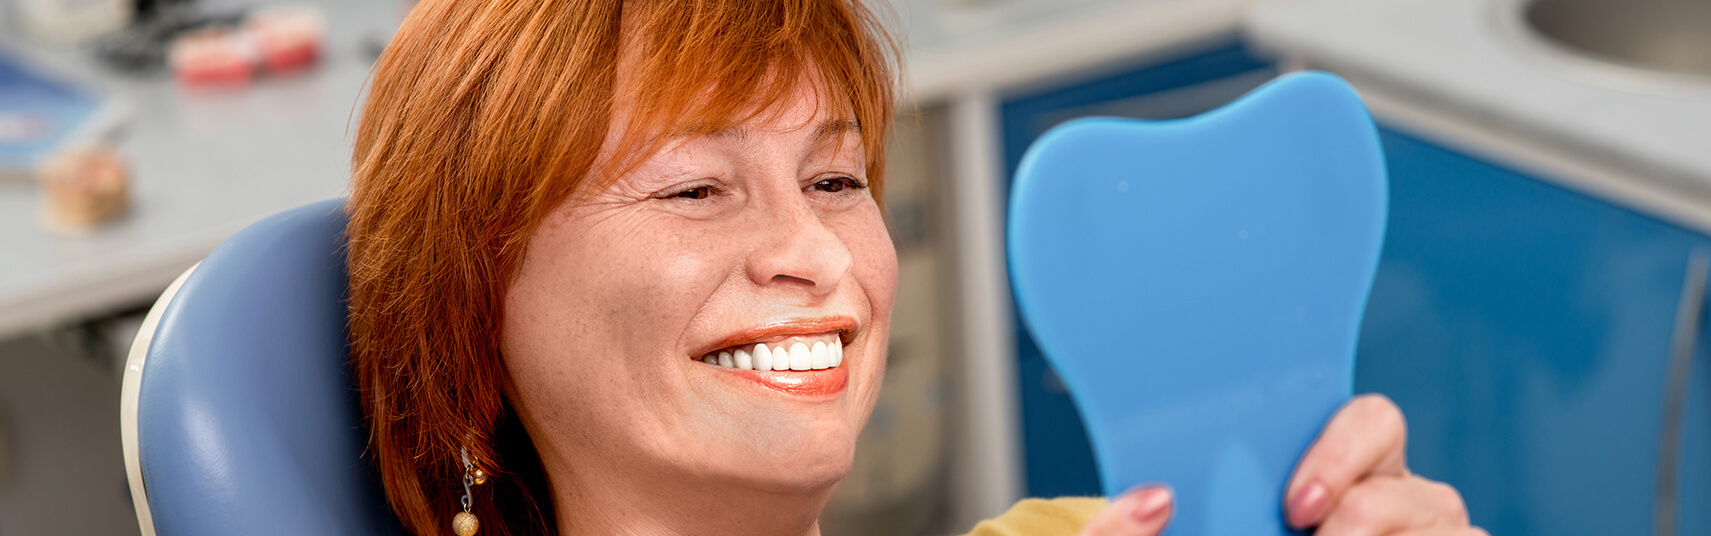 woman examining her smile in a mirror